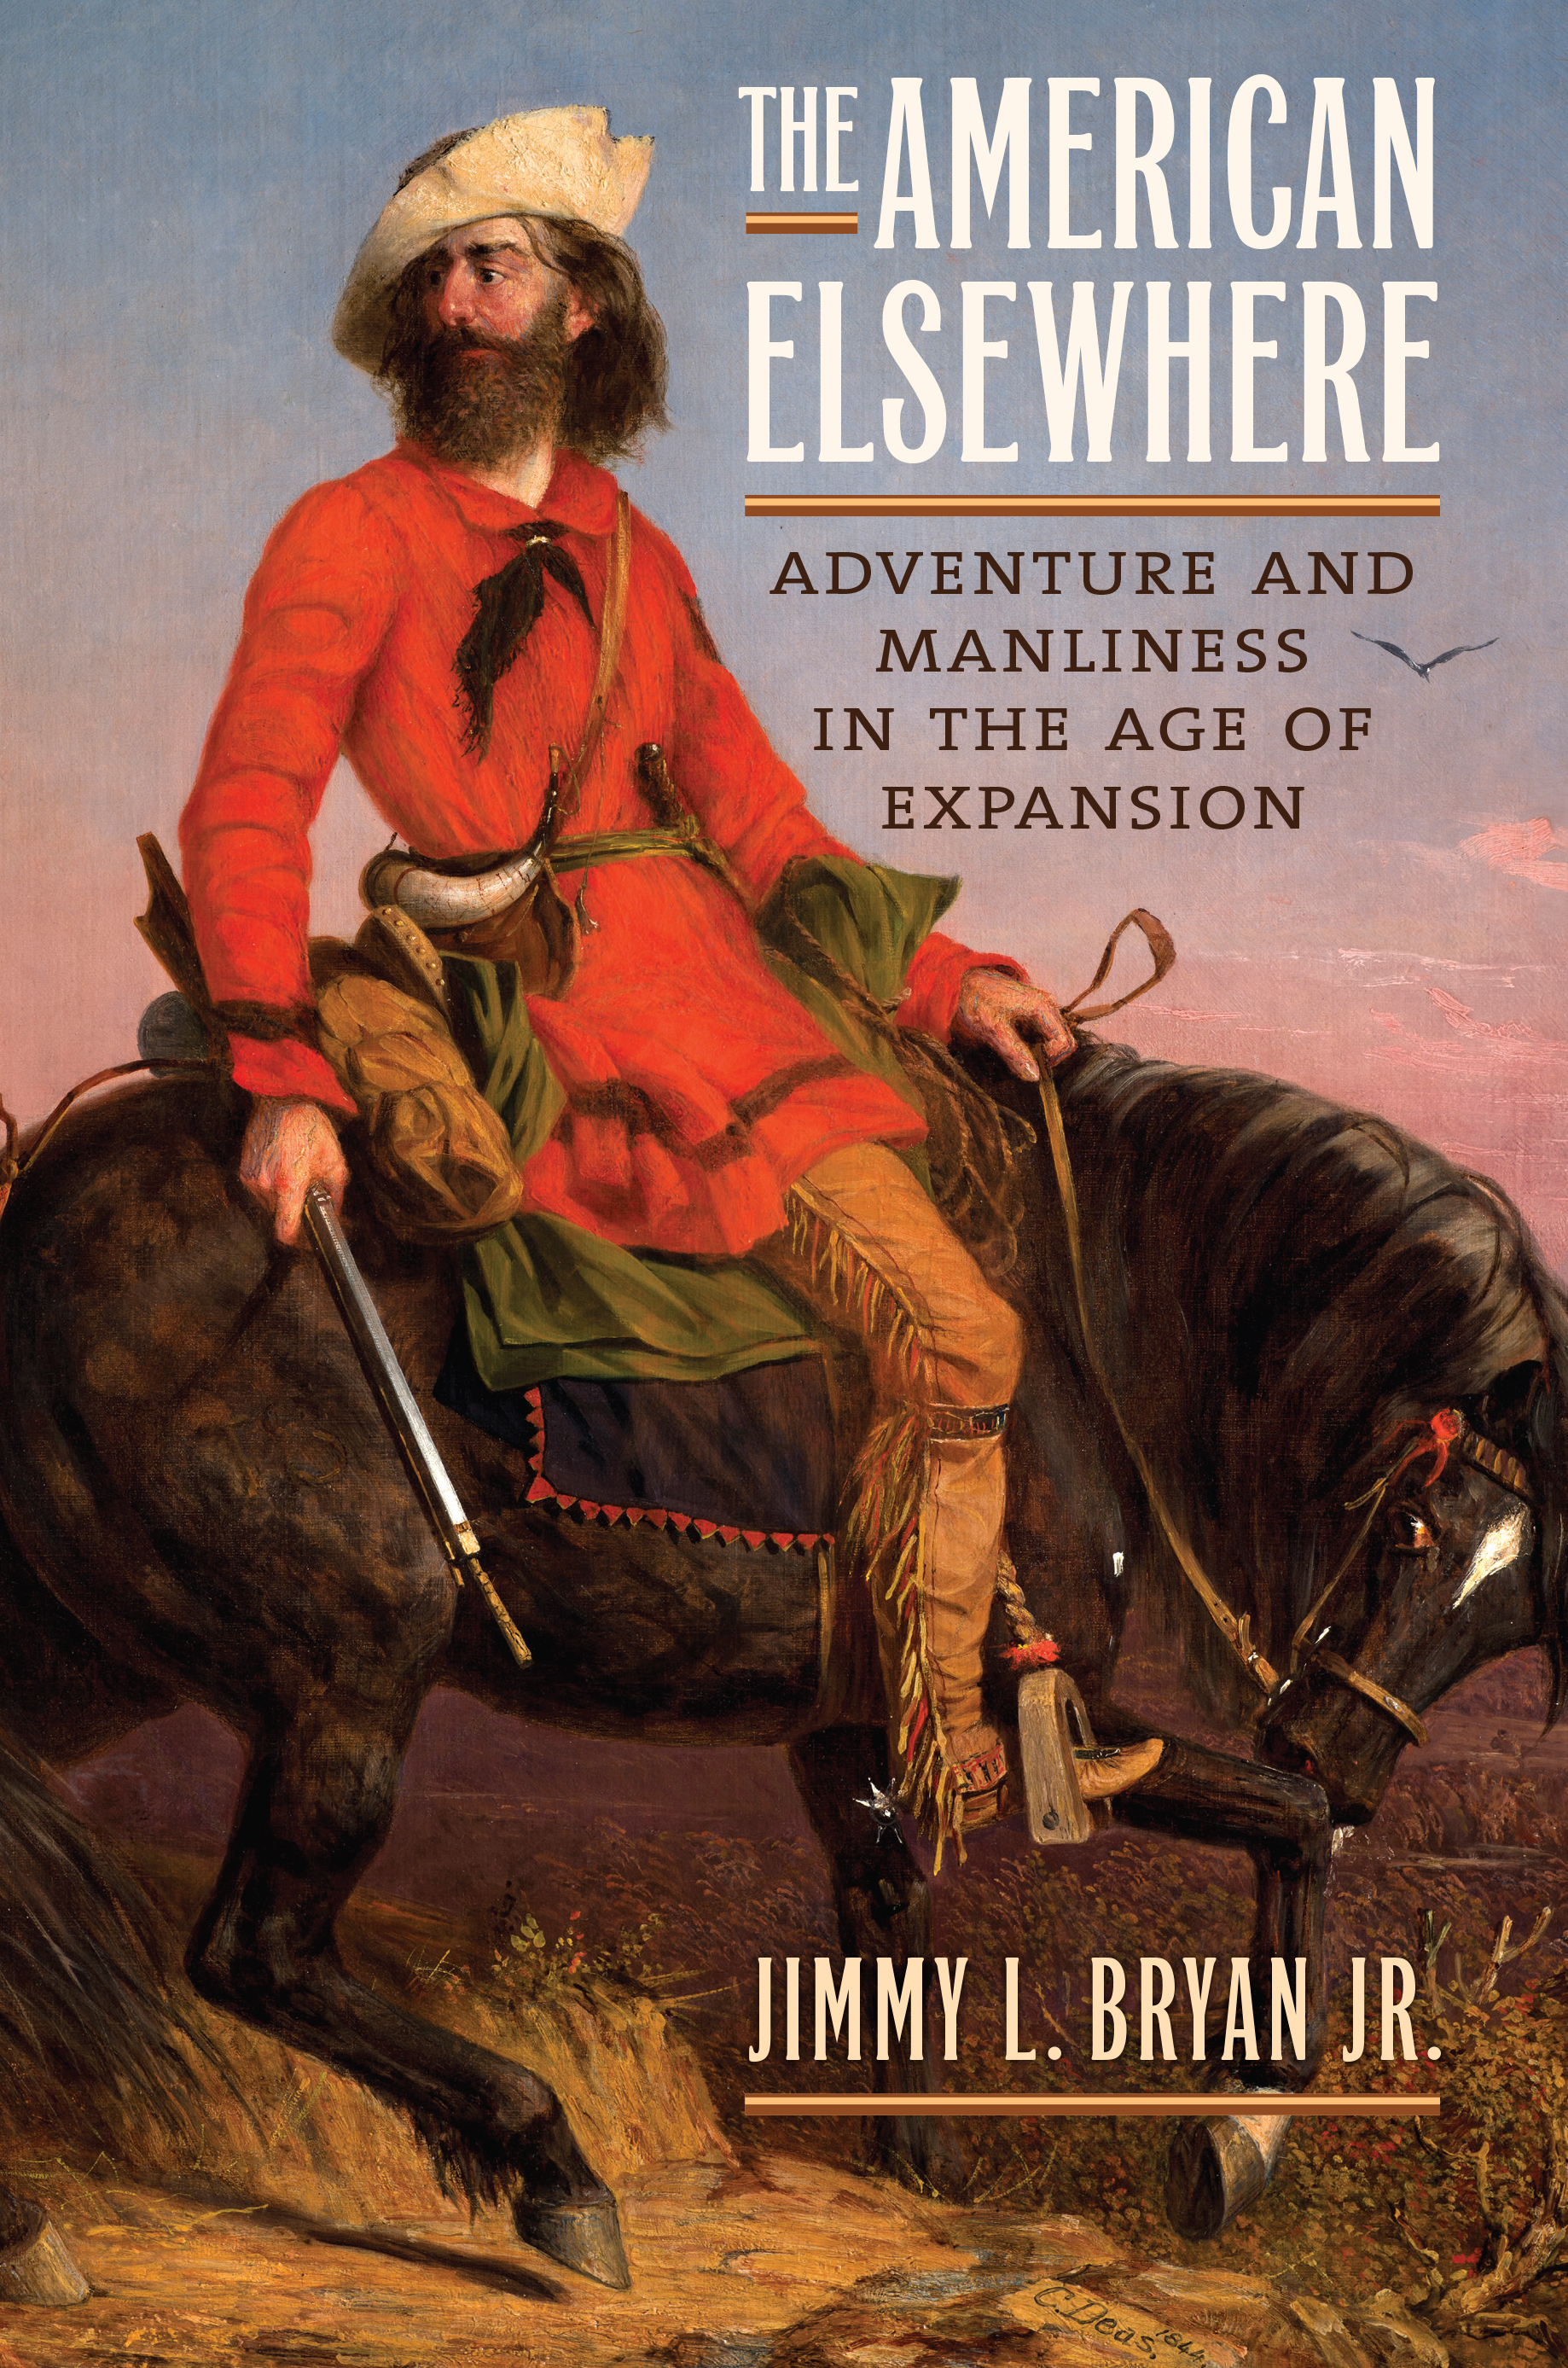 The American Elsewhere: Adventure and Manliness in the Age of Expansionism